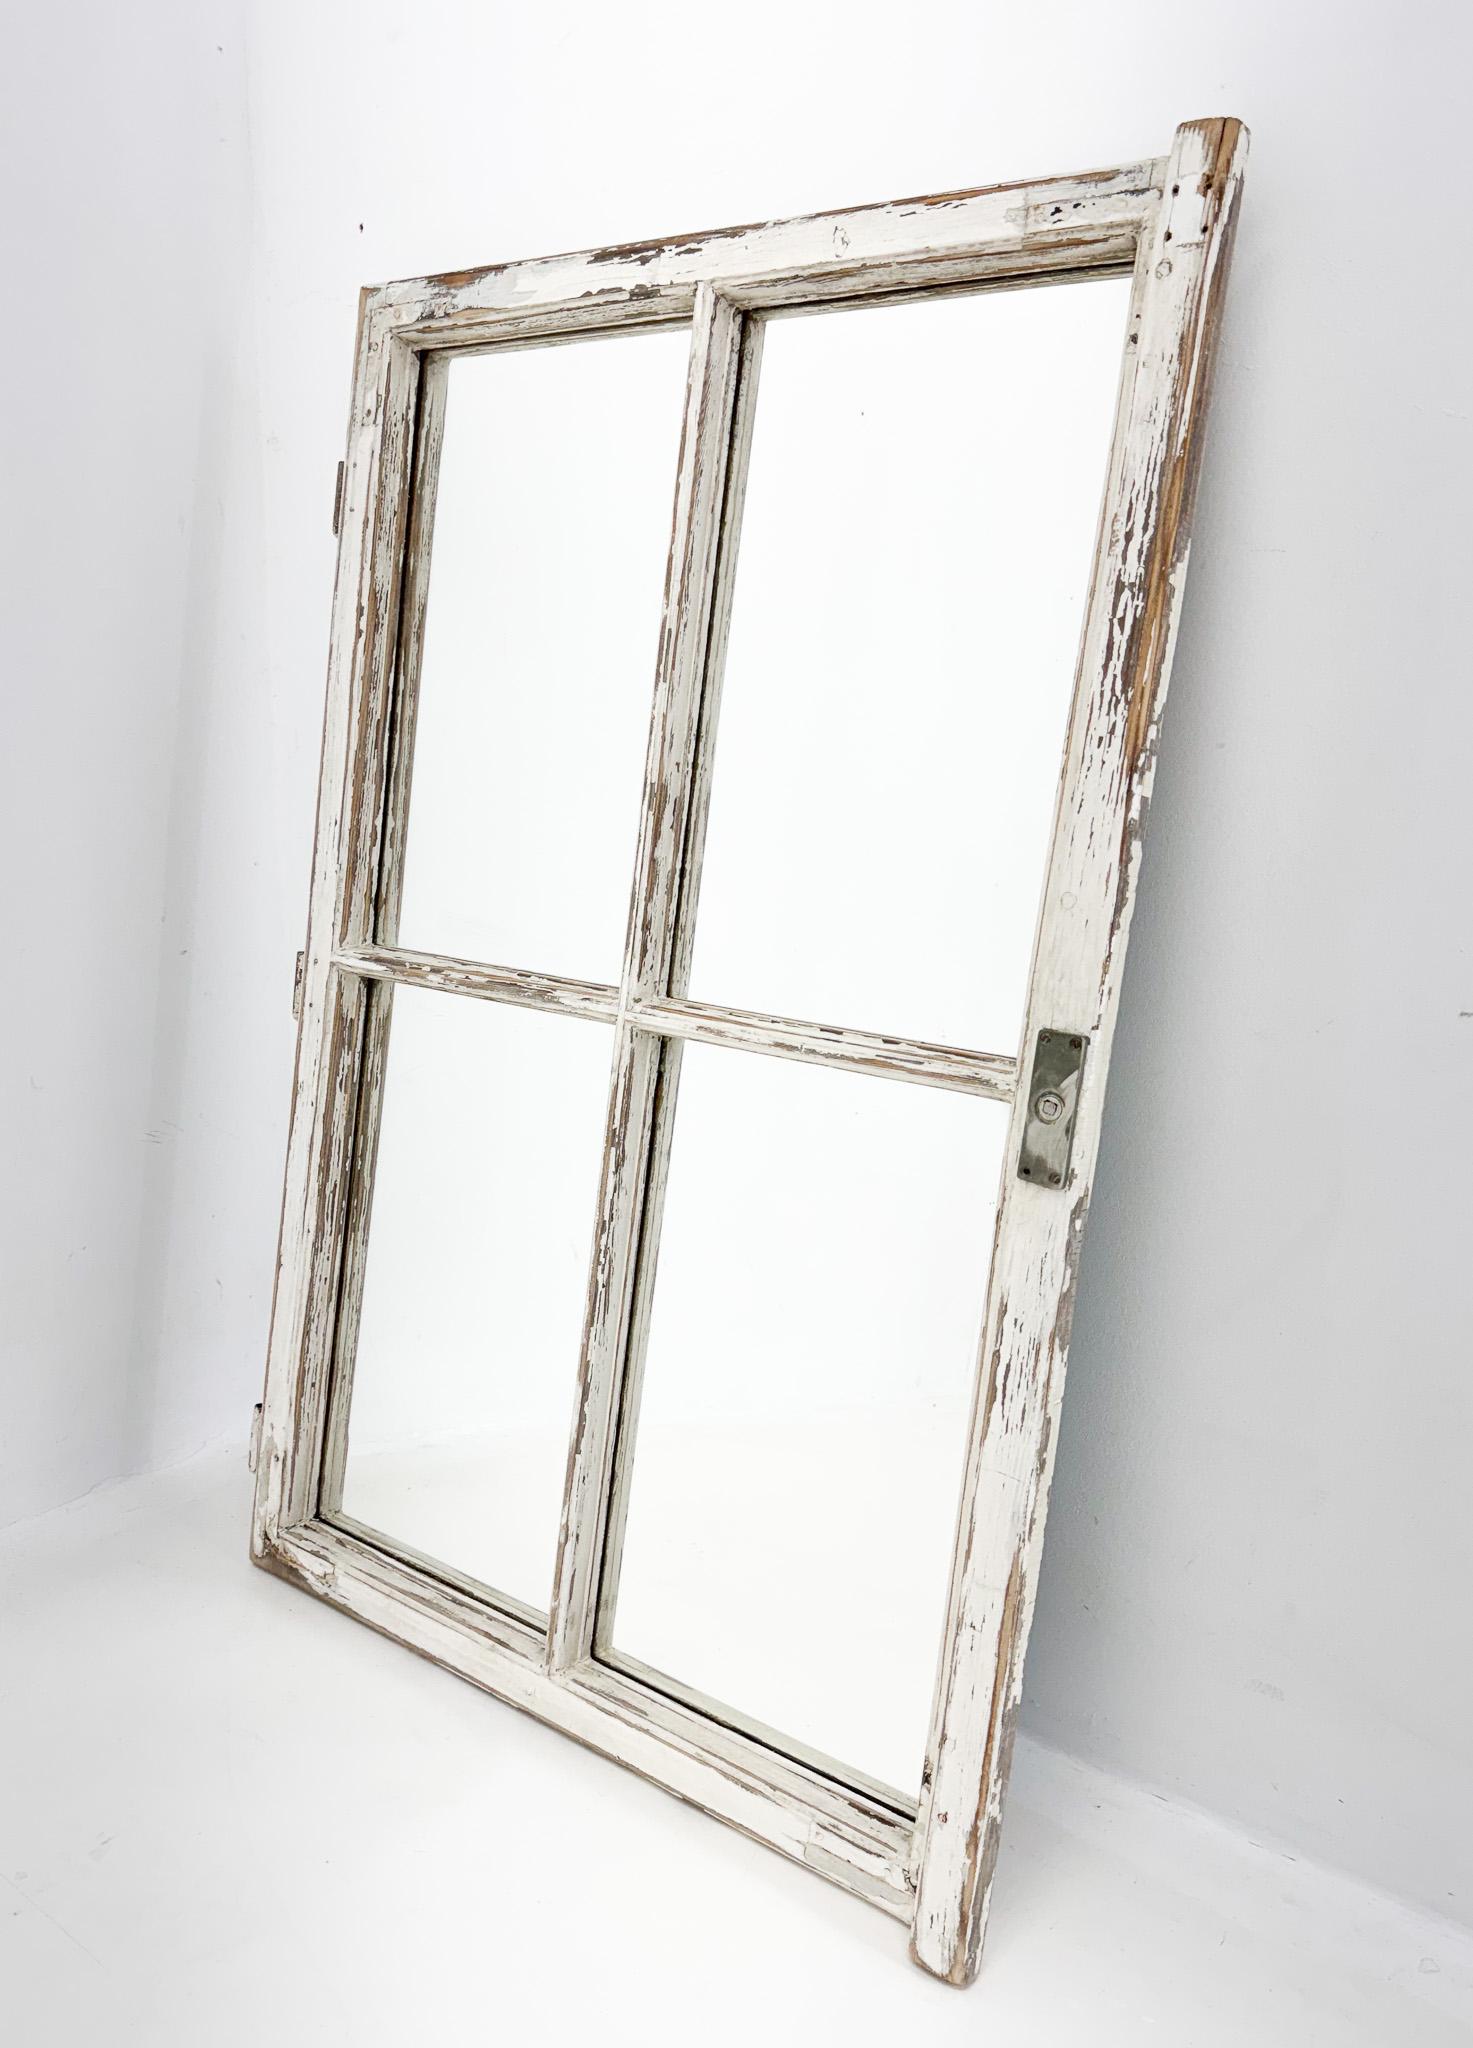 Vintage wooden window converted to a mirror with its original patina and preserved metal details. 